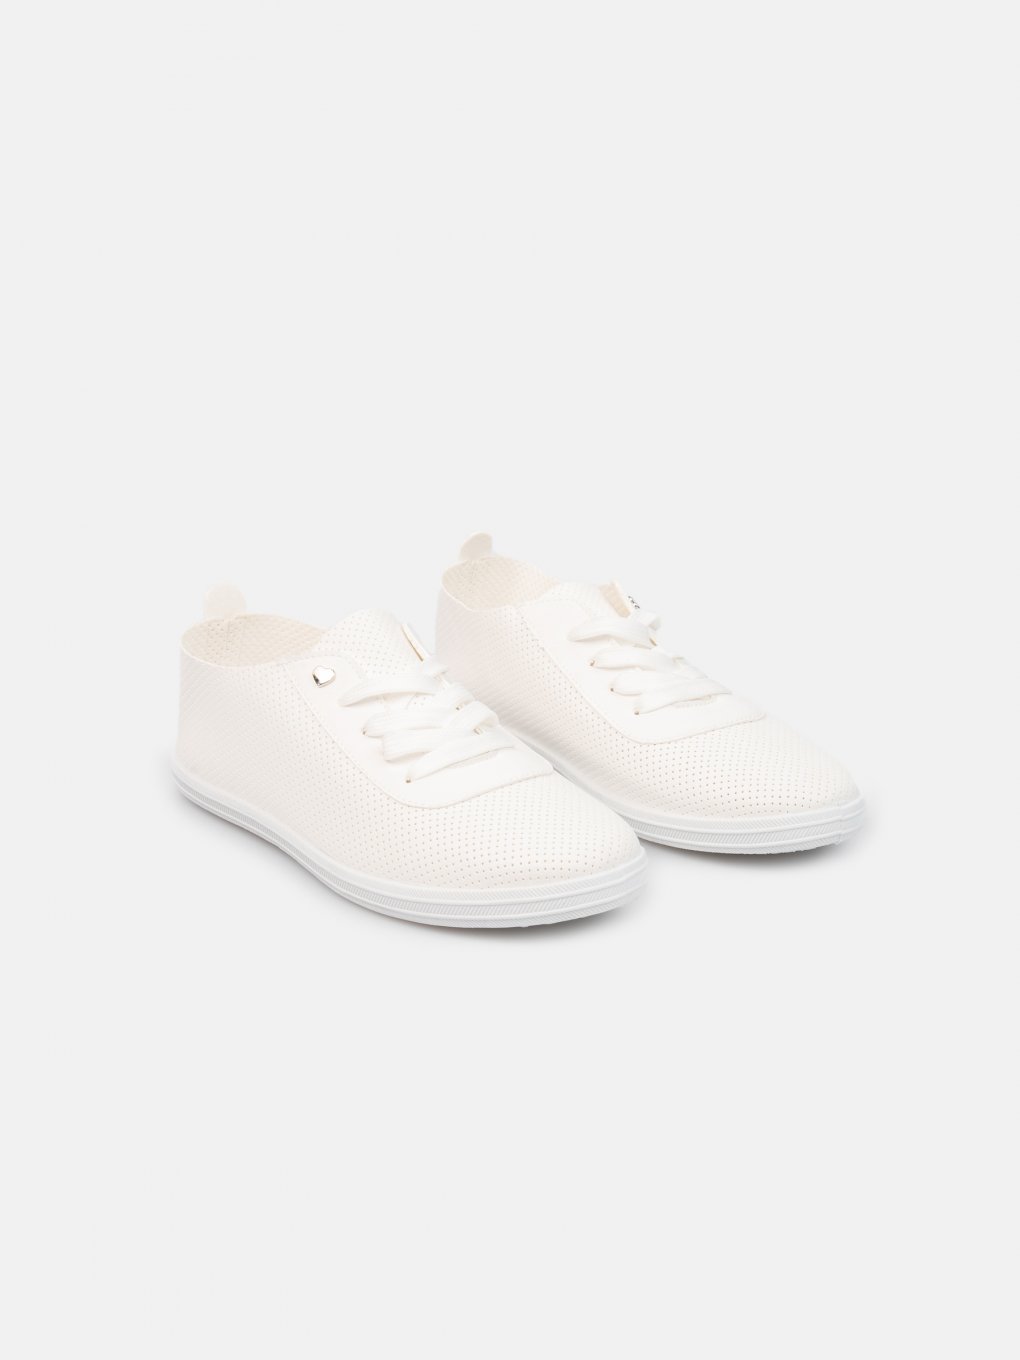 Perforated faux leather sneakers